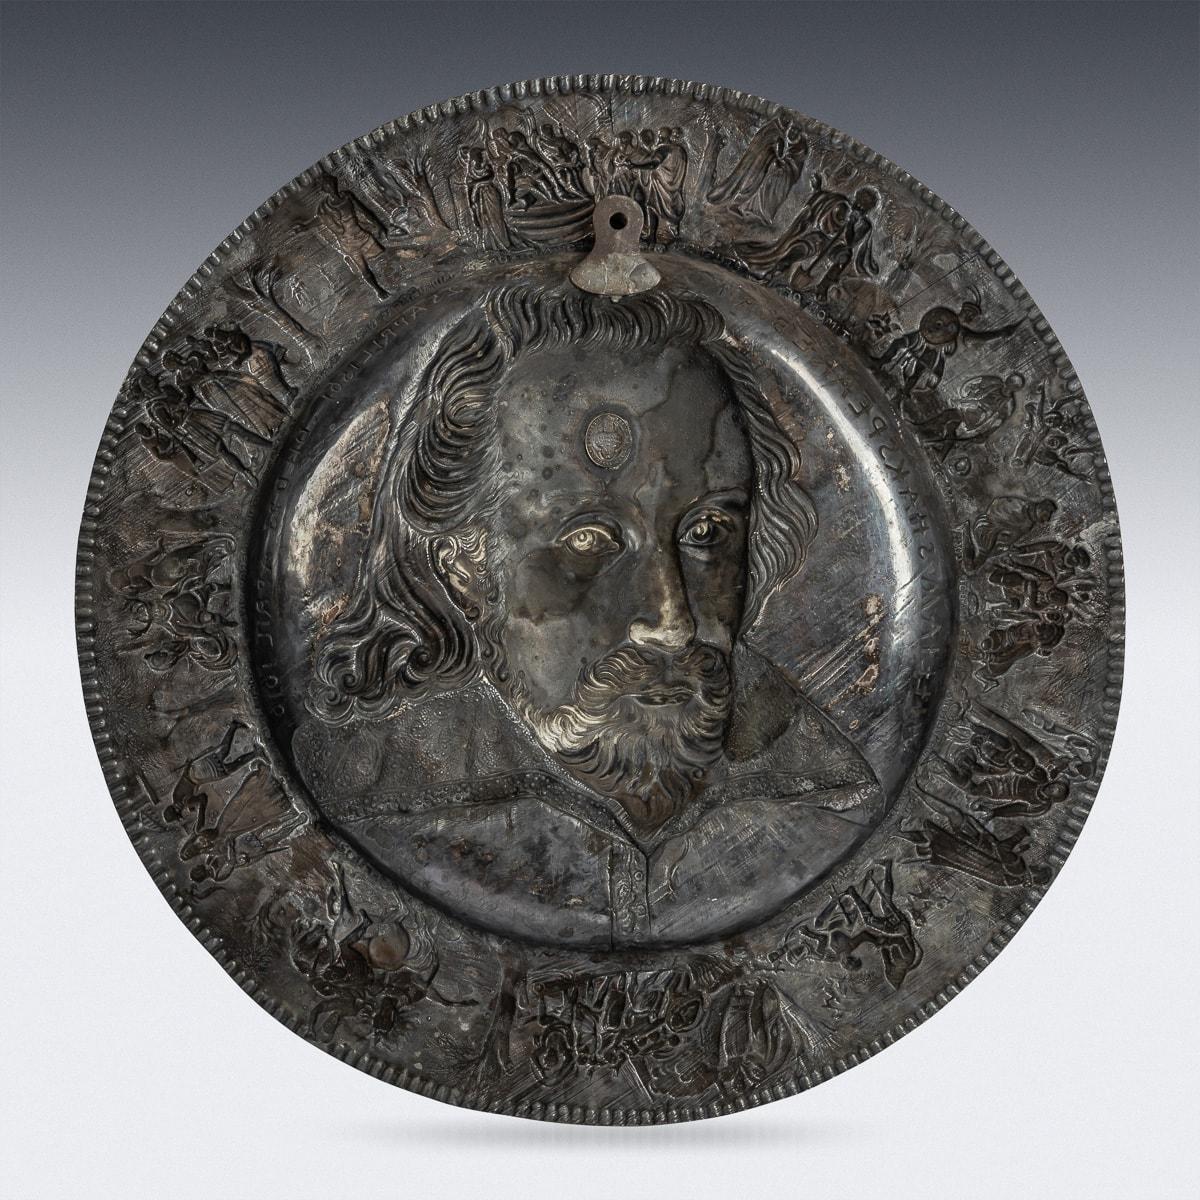 Antique mid 19th Century Victorian electroplated charger, featuring a depiction of William Shakespeare, Born 23 April 1561 - Died 23 April 1616. The charger is of a notably large size, with elaborately embossed border adorned with scenes from